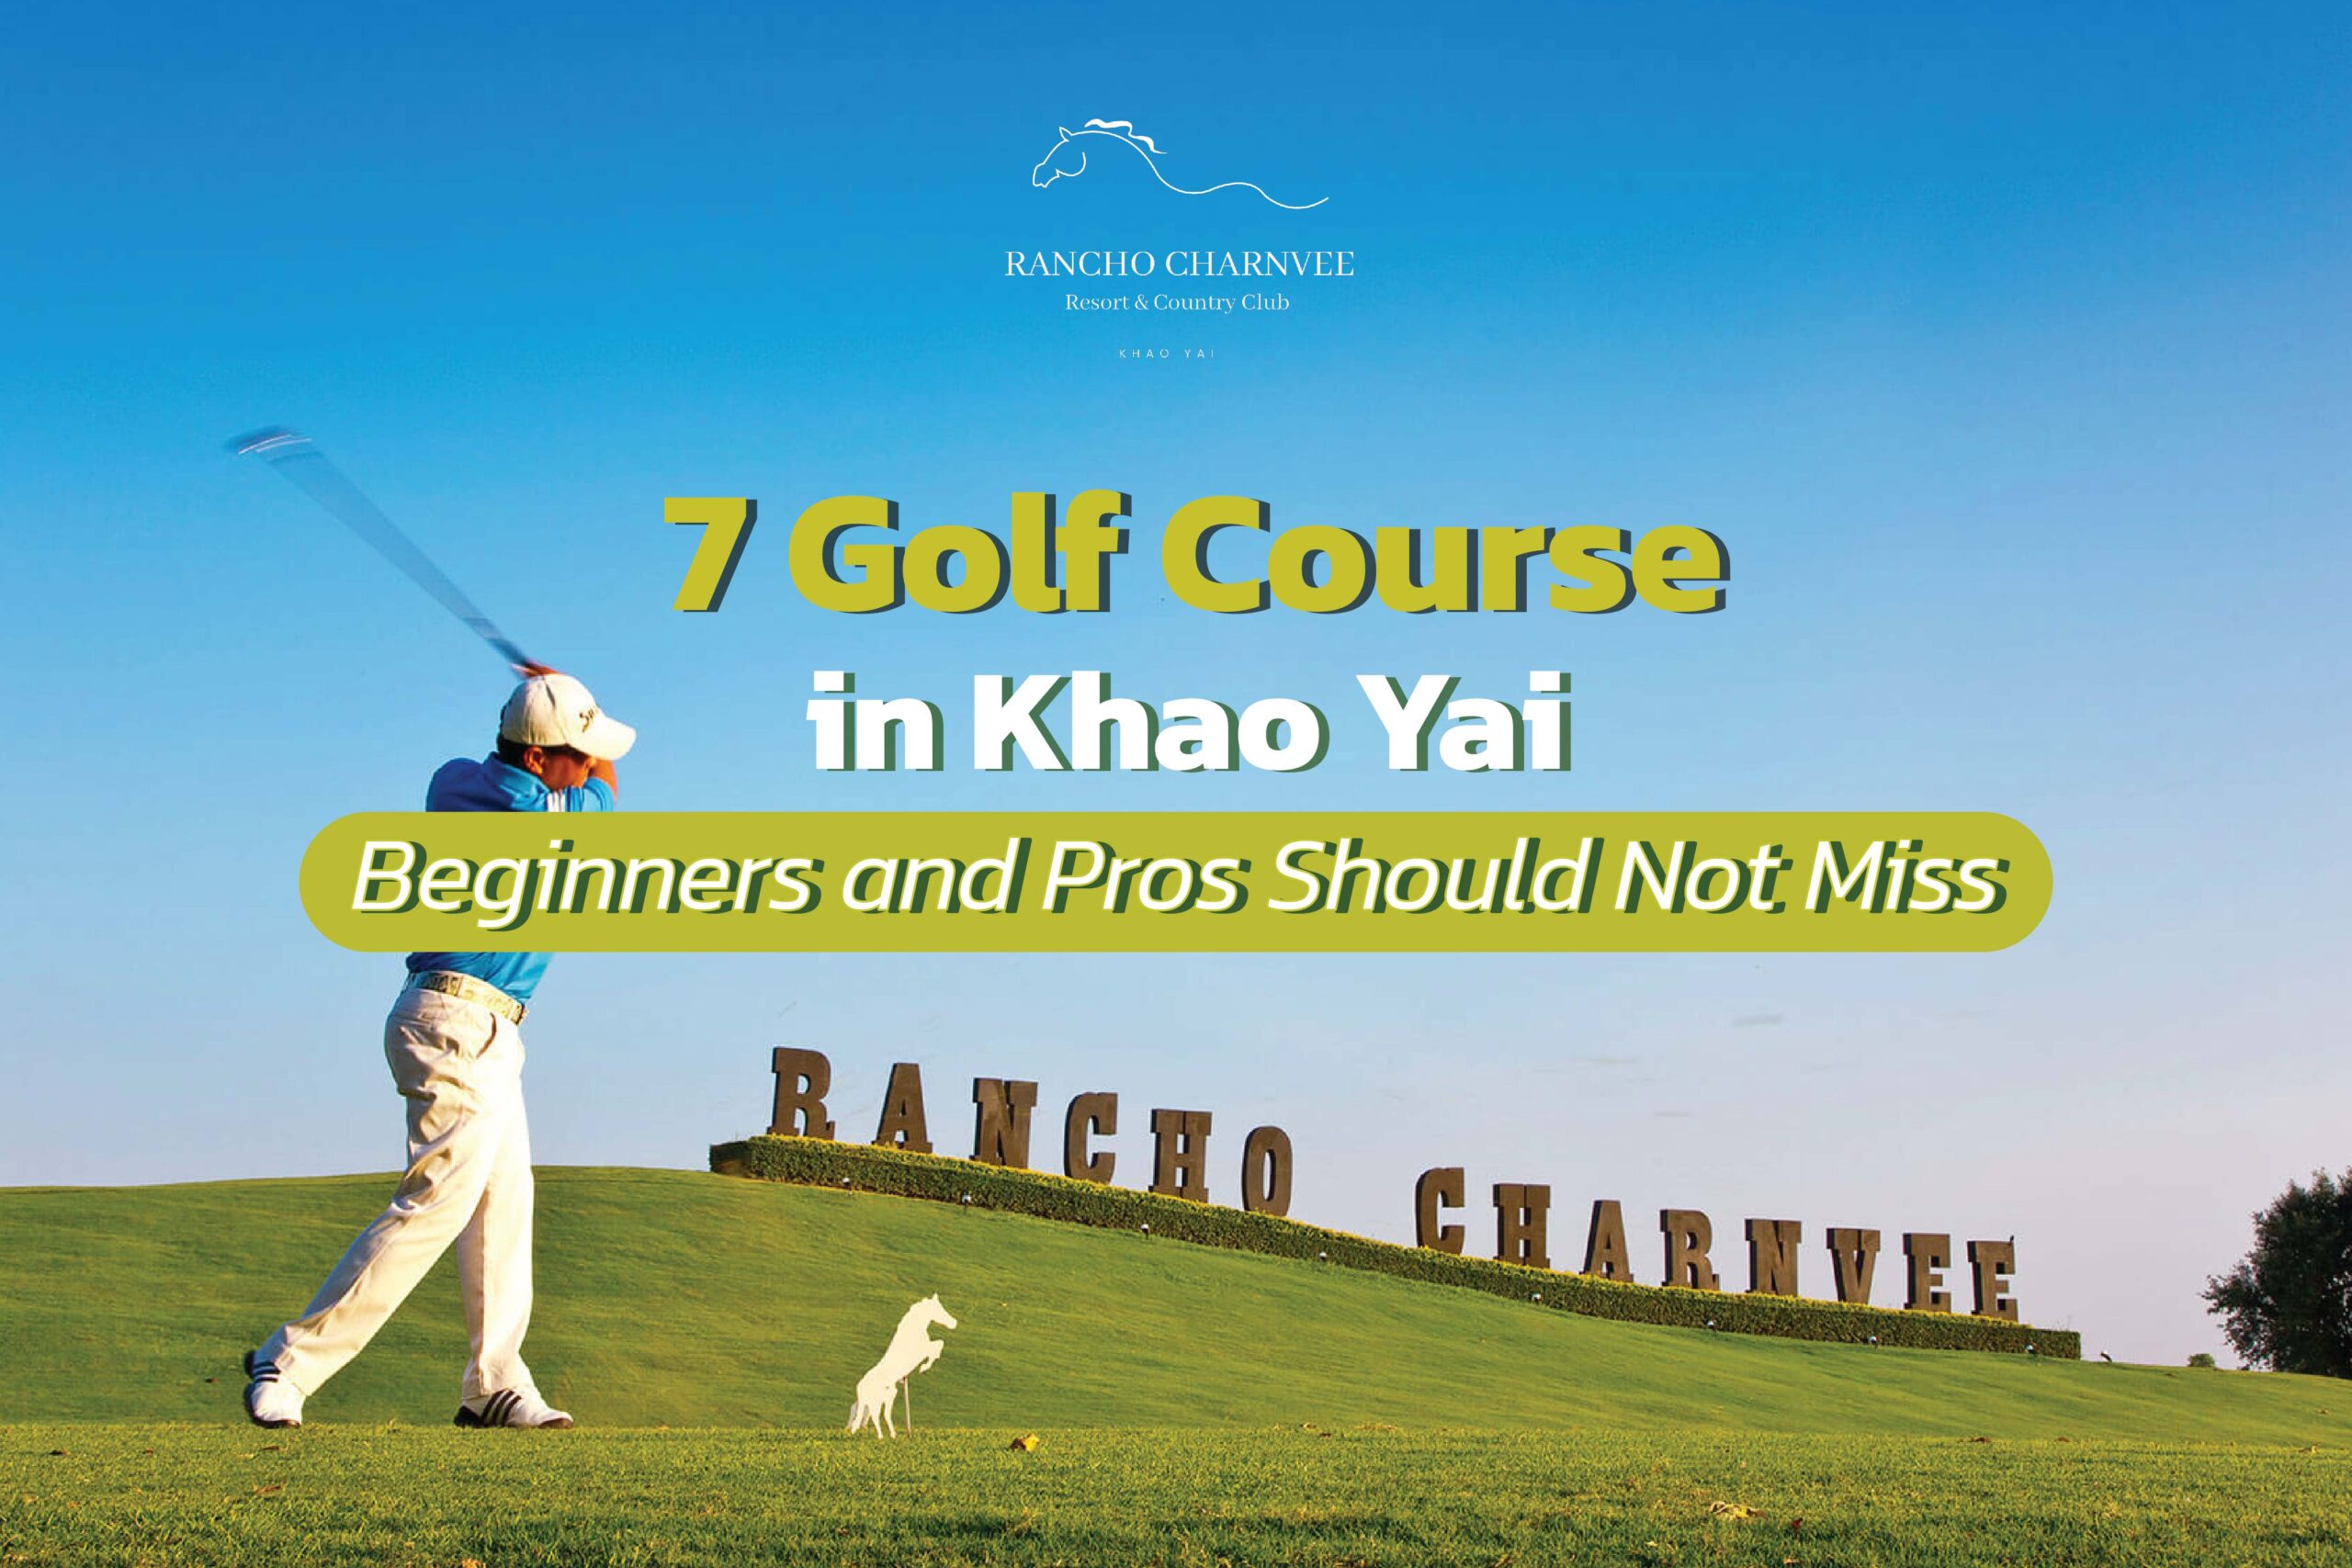 7 Golf Course in Khao Yai: Beginners and Pros Should Not Miss